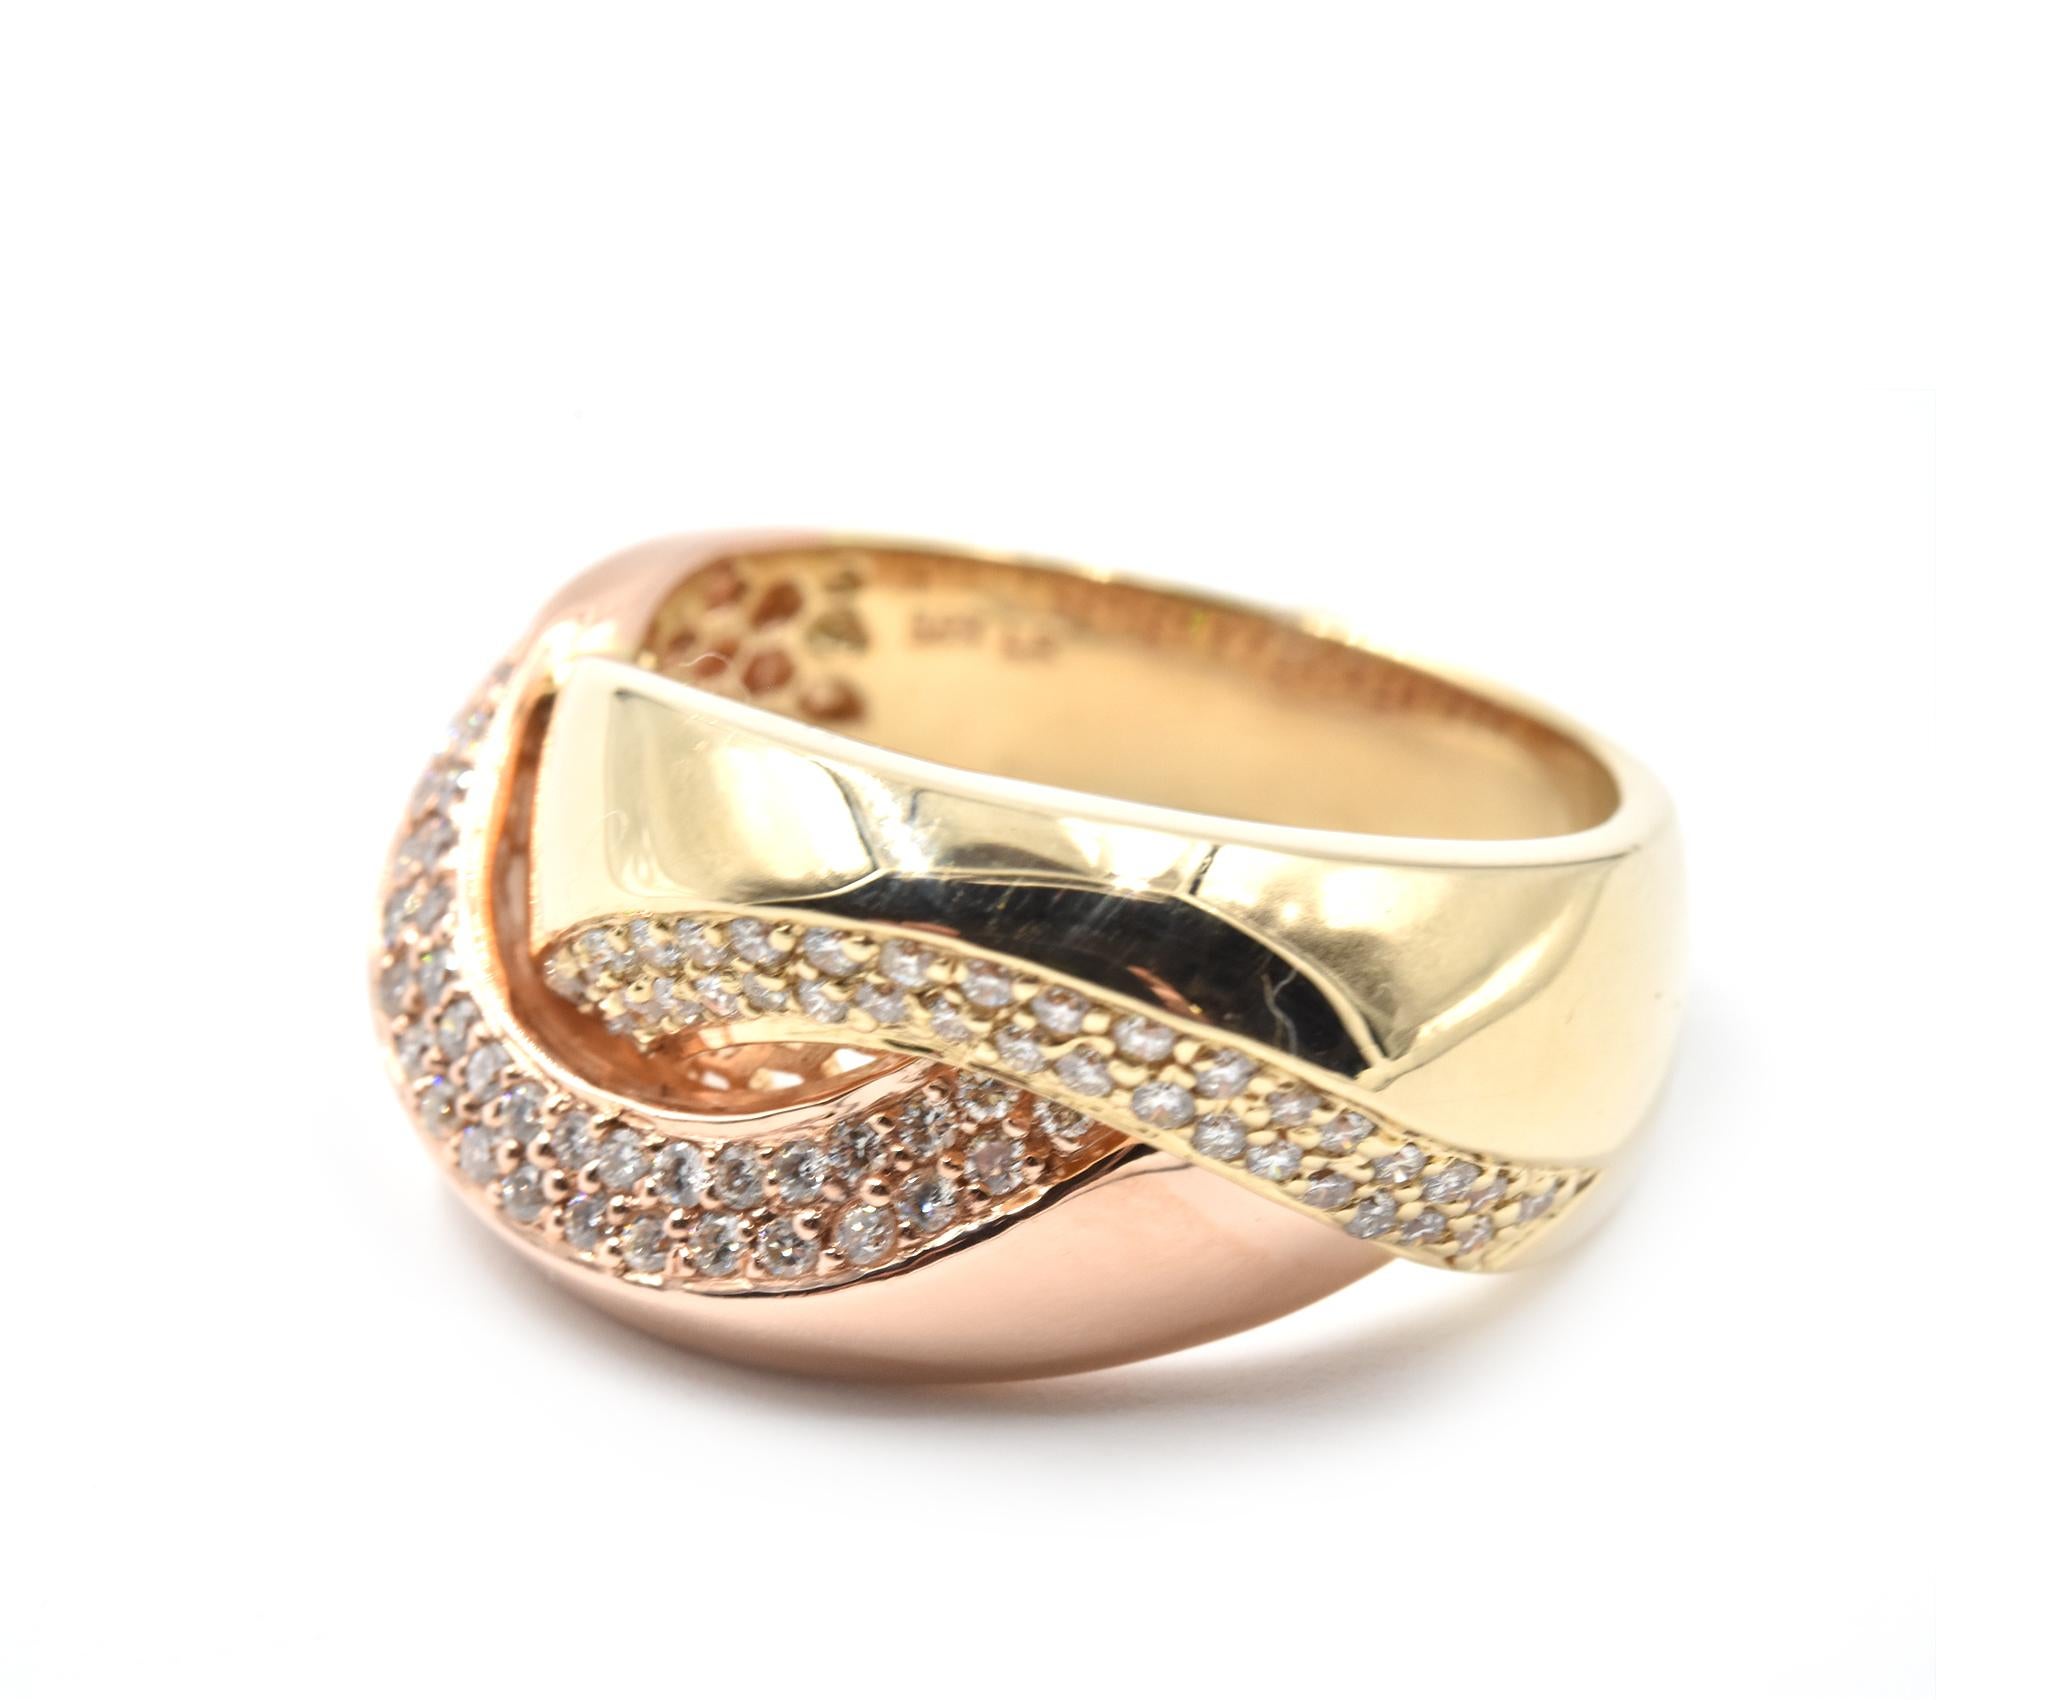 Designer: custom design
Material: 14k rose gold
Diamonds: 70 round brilliant cut = 0.70 carat weight
Color: I
Clarity: SI1
Ring size: 7 1/2 (please allow two additional shipping days for sizing requests) 
Weight: 10.06 grams 
